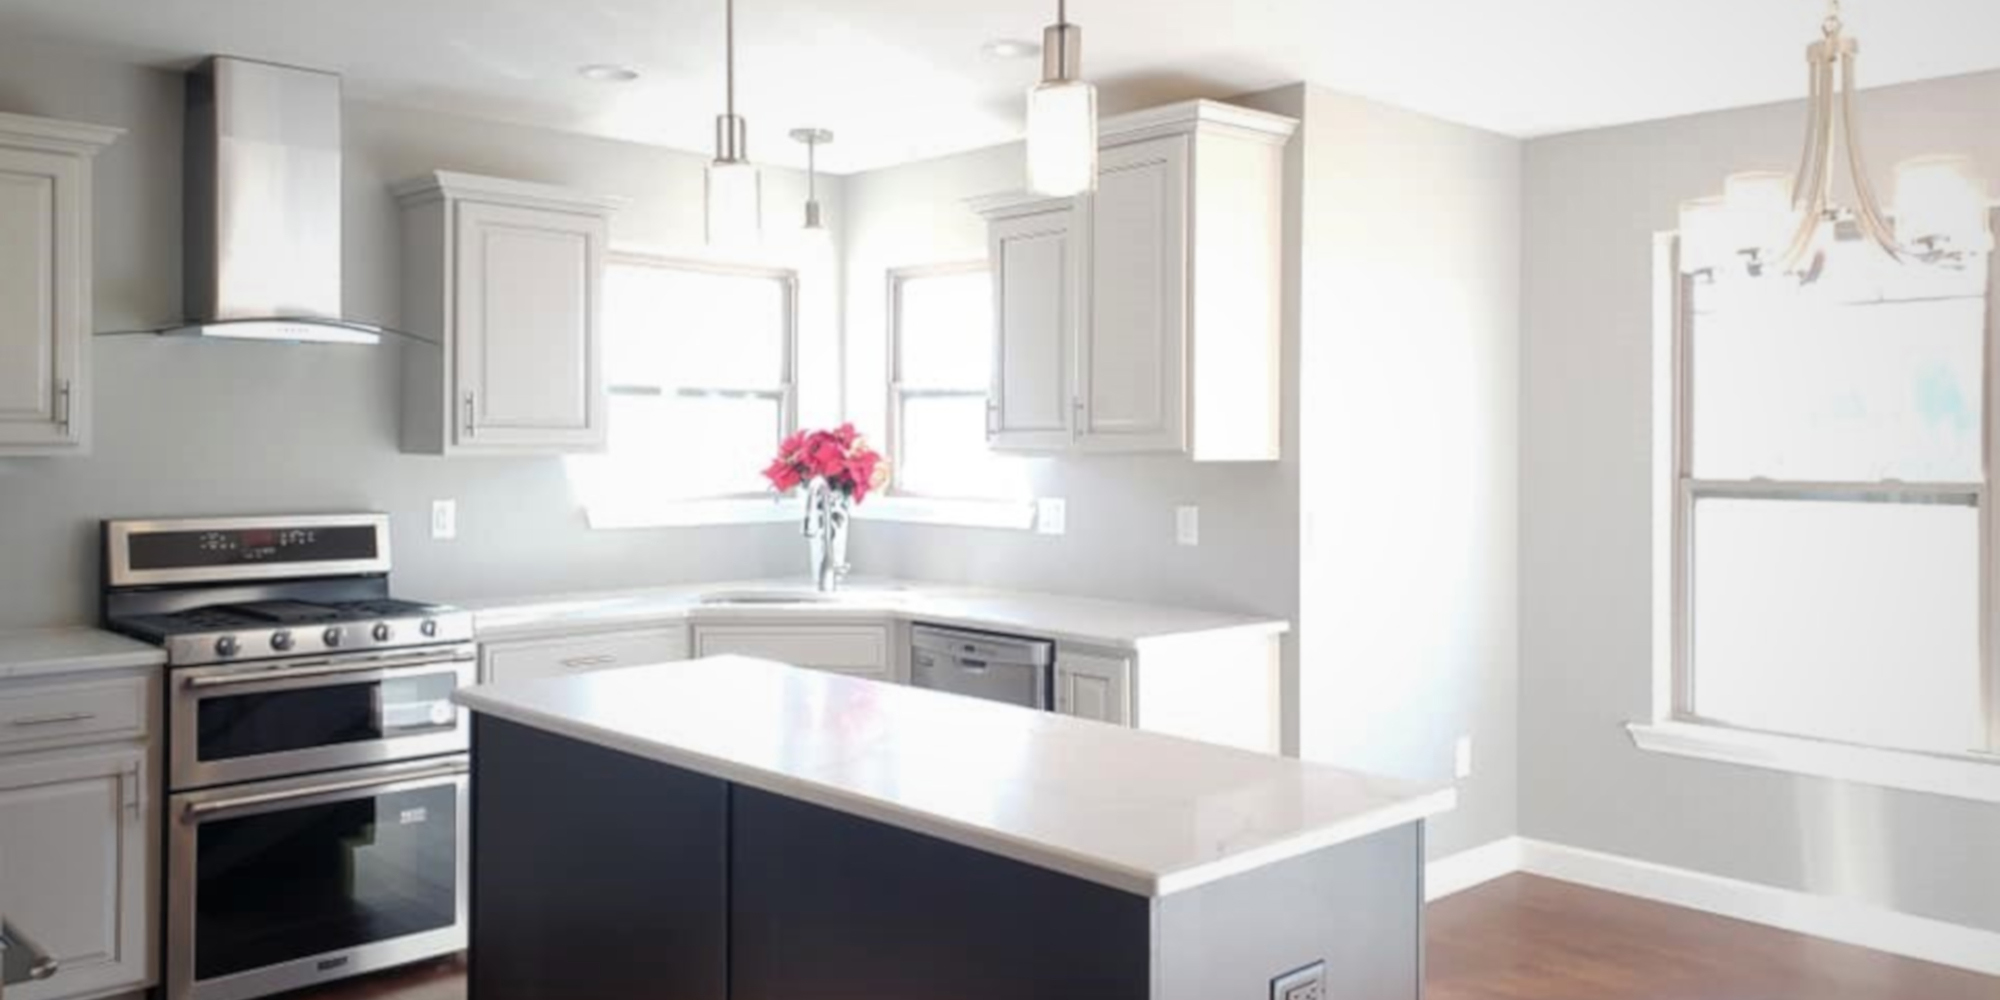 Kitchen Remodel by Homes by Deesign